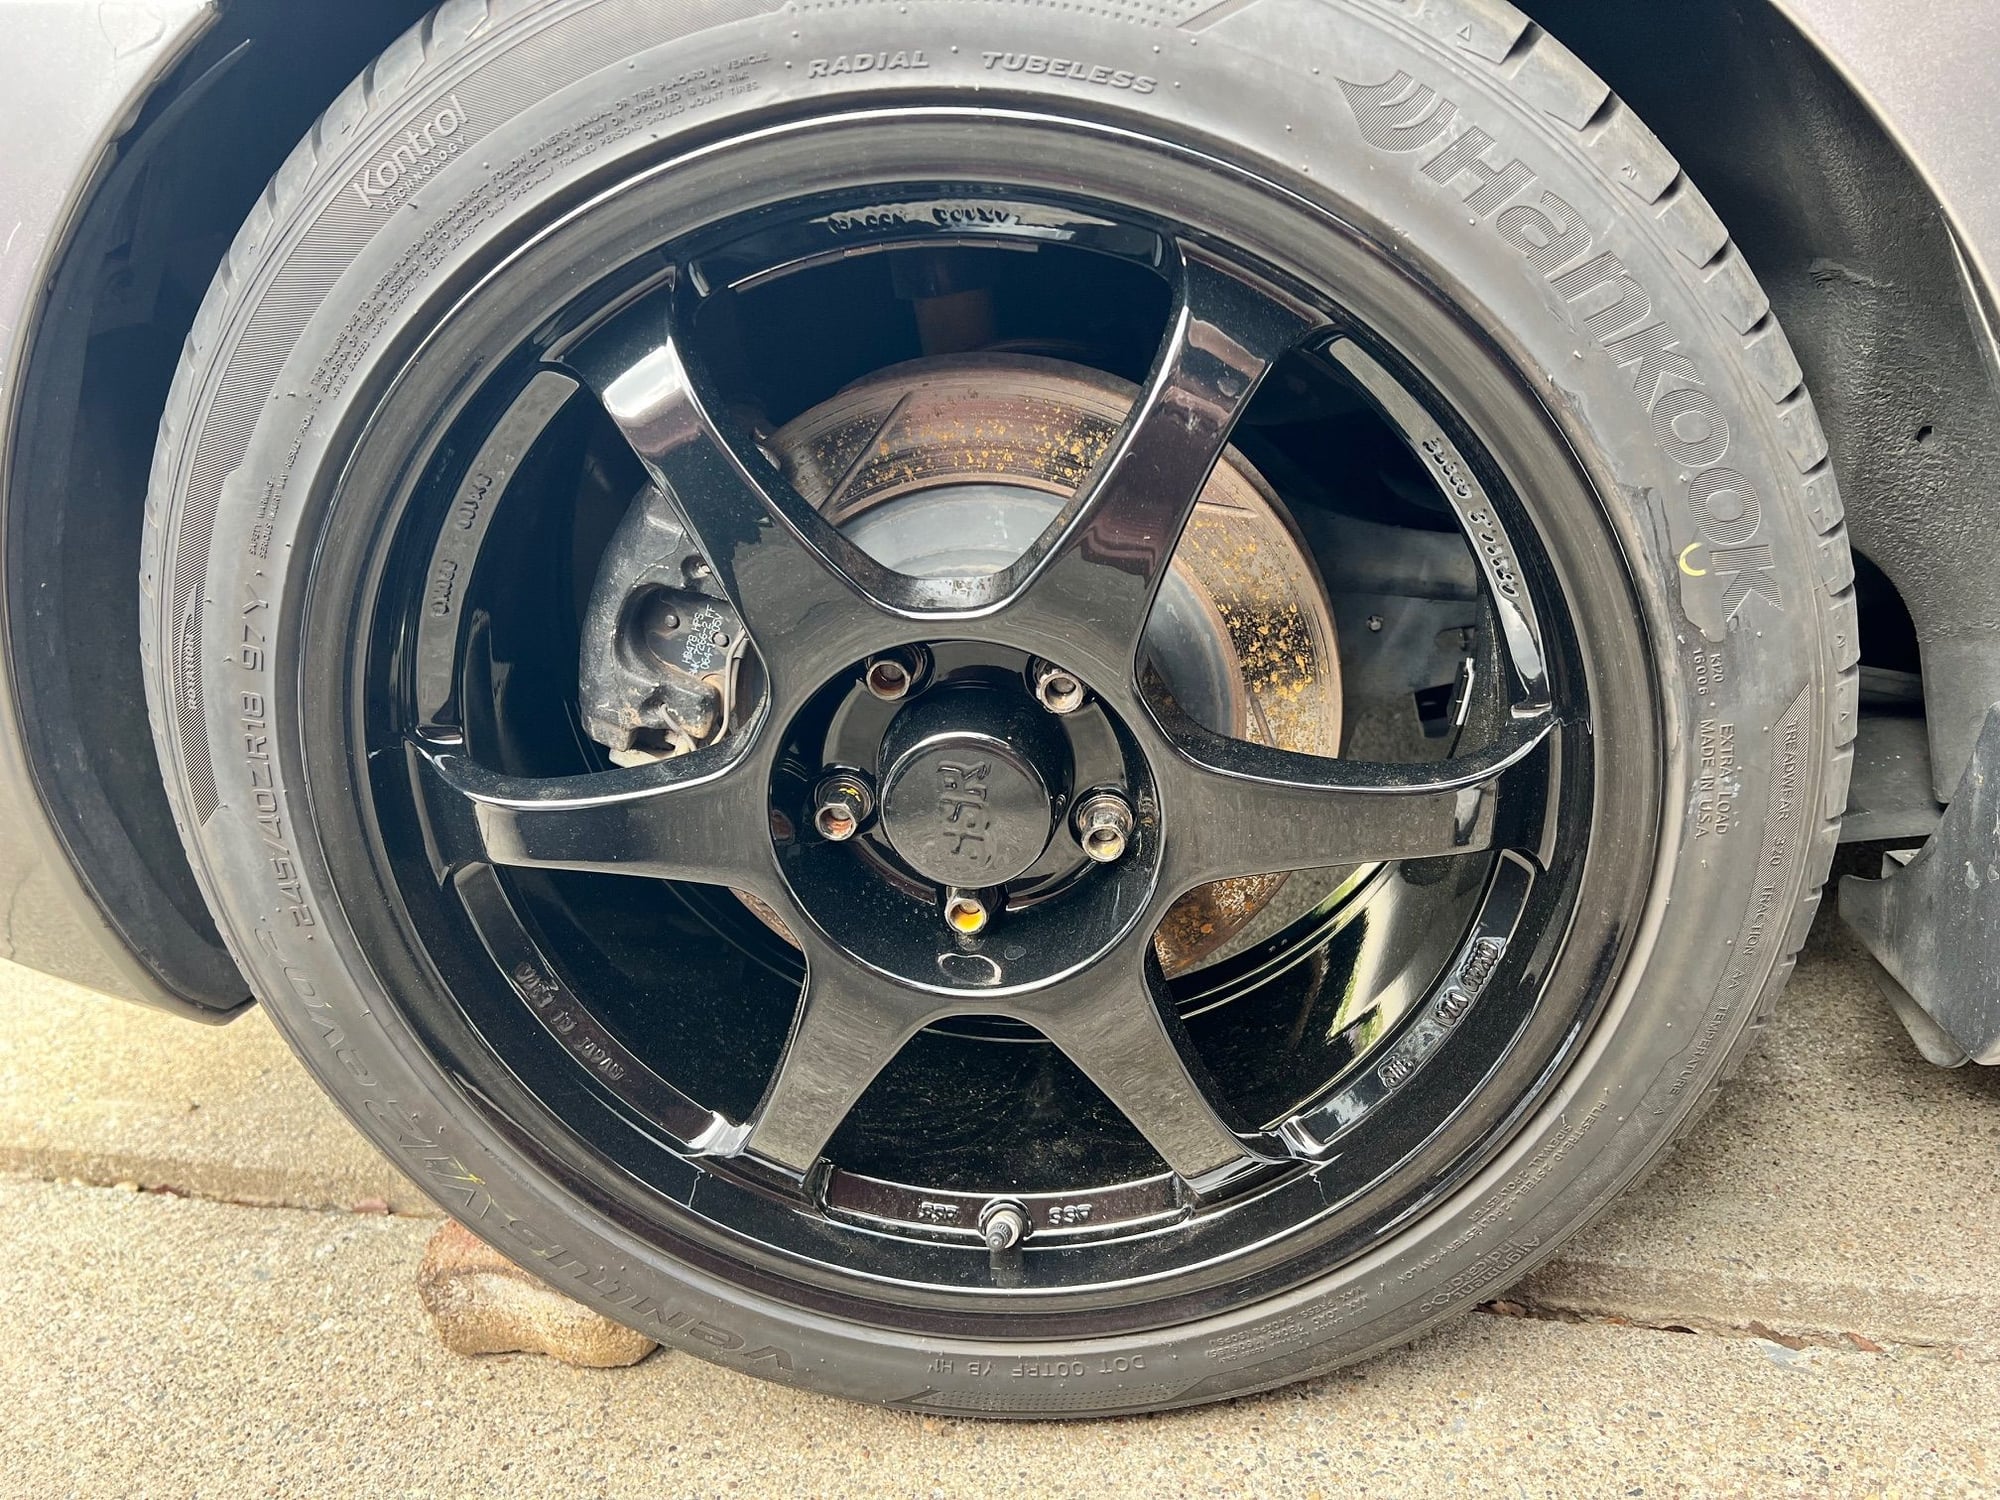 Wheels and Tires/Axles - SSR Type-C 18x8.5 +42 (SSF) - New - 0  All Models - Monterey, CA 93940, United States